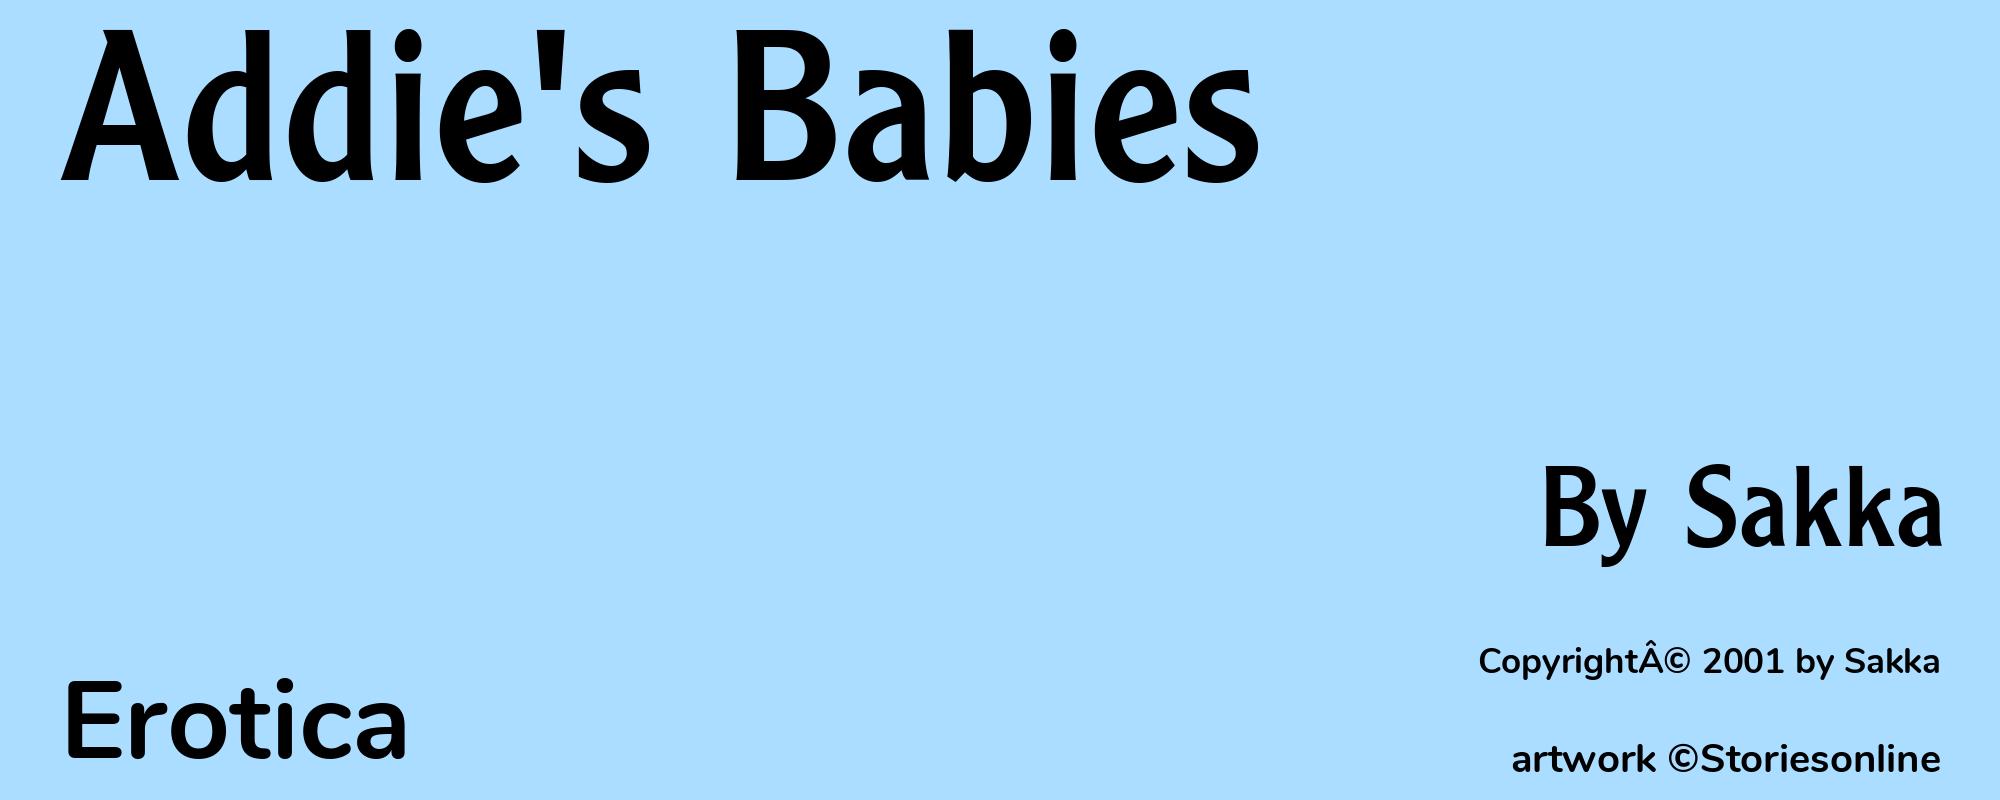 Addie's Babies - Cover